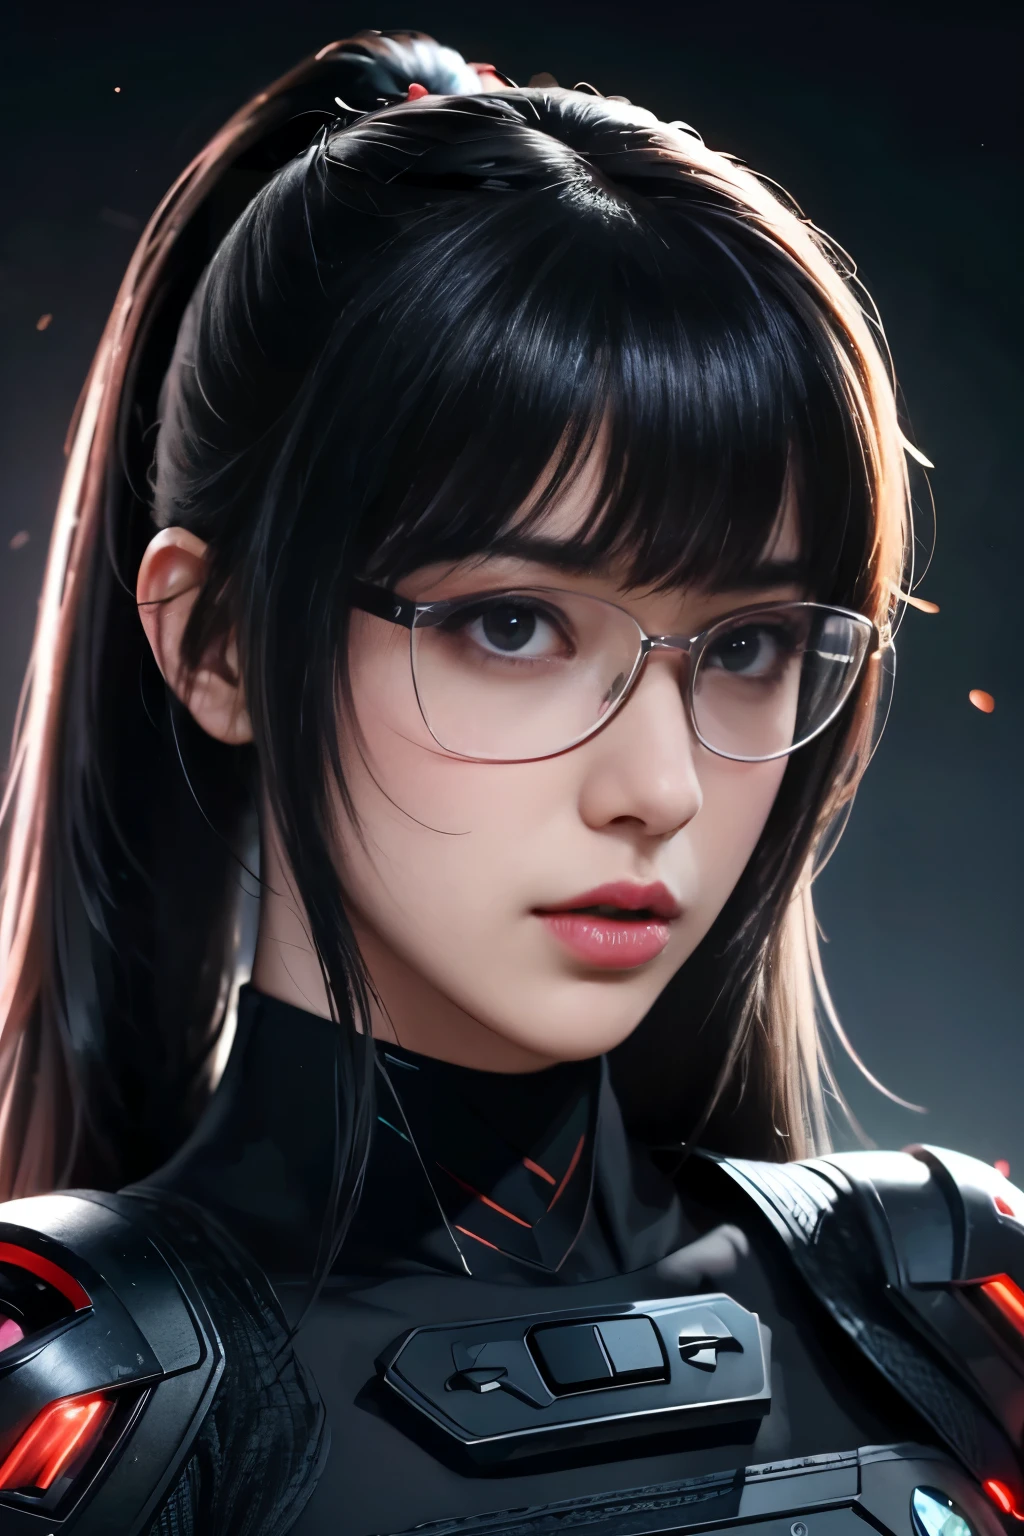 masterpiece，best quality，high resolution，8K，((portrait))，(Head close-up)，original photo，real picture，Digital Photography，(Cyberpunk style female Special Forces warrior)，(Special Forces)，20-year-old girl，Long Ponytail，By Bangs，Amazing amount of hair，Red eye hair)，Large Breasts，Chest groove，(A wide variety of decorations，Holographic glasses of the future，Tactical helmets)，Open lips，Keep your mouth smooth and attractive，Serious and arrogant，Calm and handsome，(Special Forces Clothing，Combat uniform，Combined Armor，Black)，Photo poses，cyberpunk characters，Sci-fi style，Gray background，oc render reflection texture